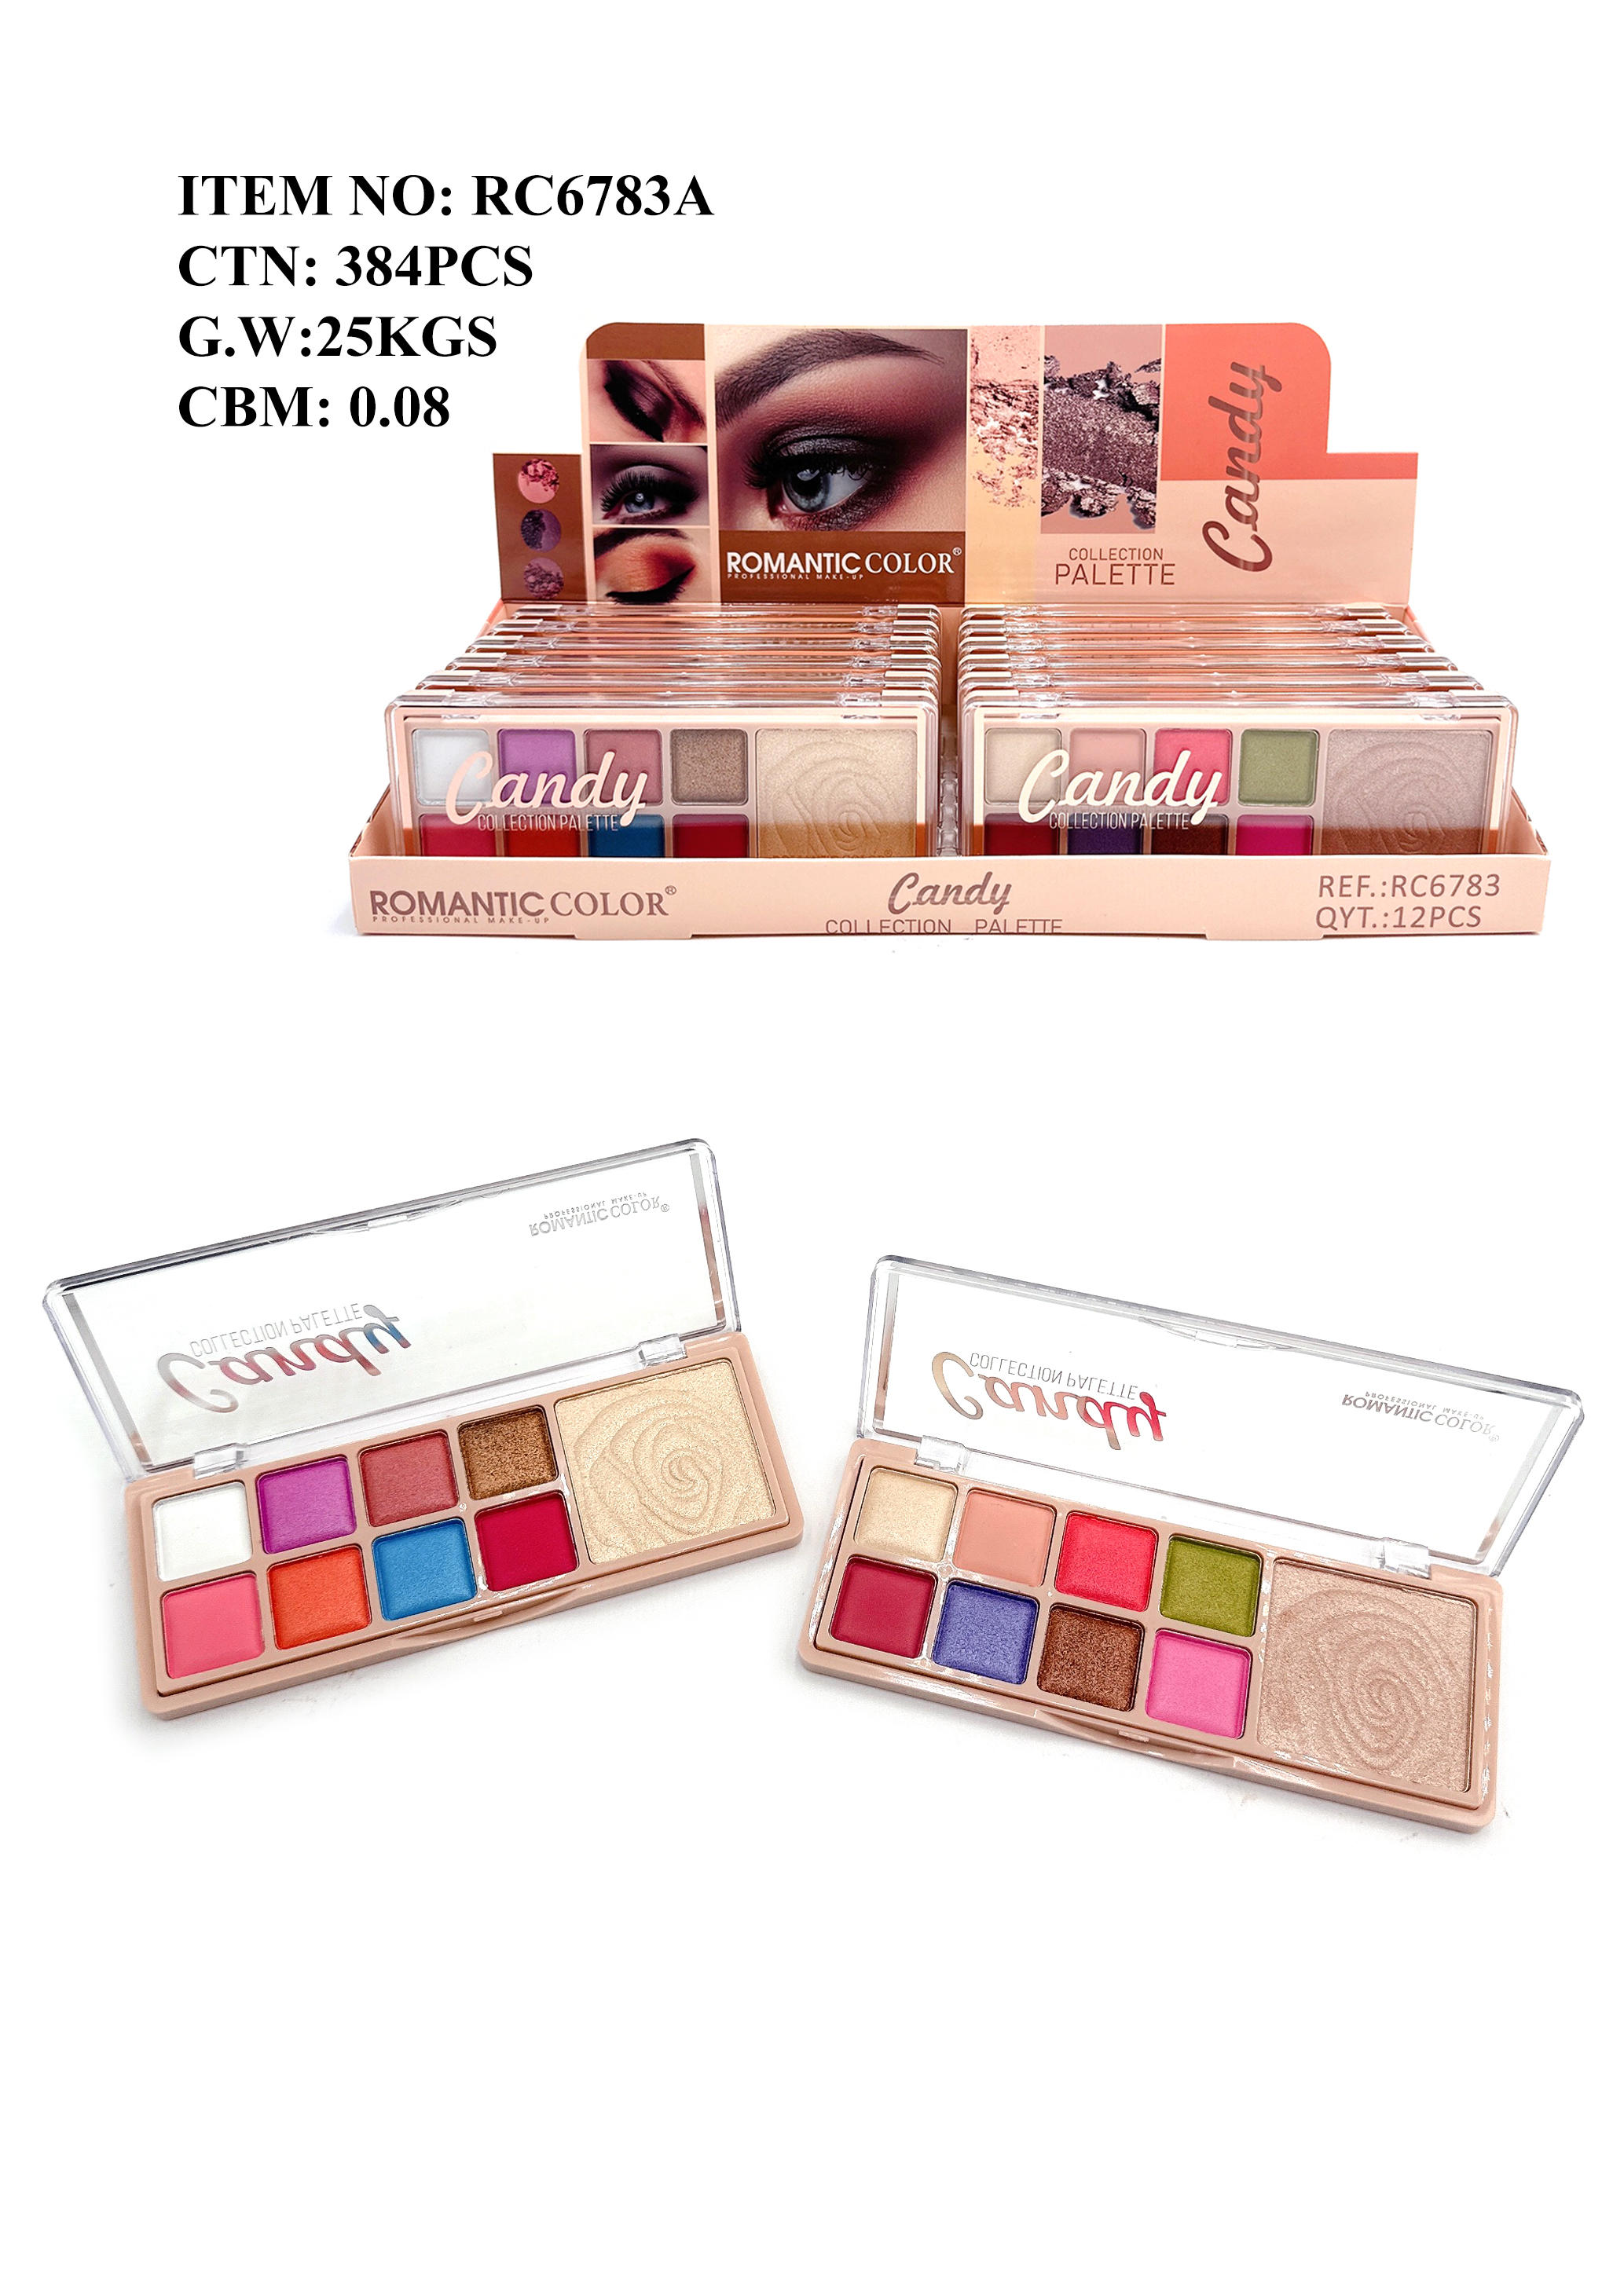 ROMANTIC COLOR CANDY EYESHADOW|9 COLORS EYESHADOW PALETTE